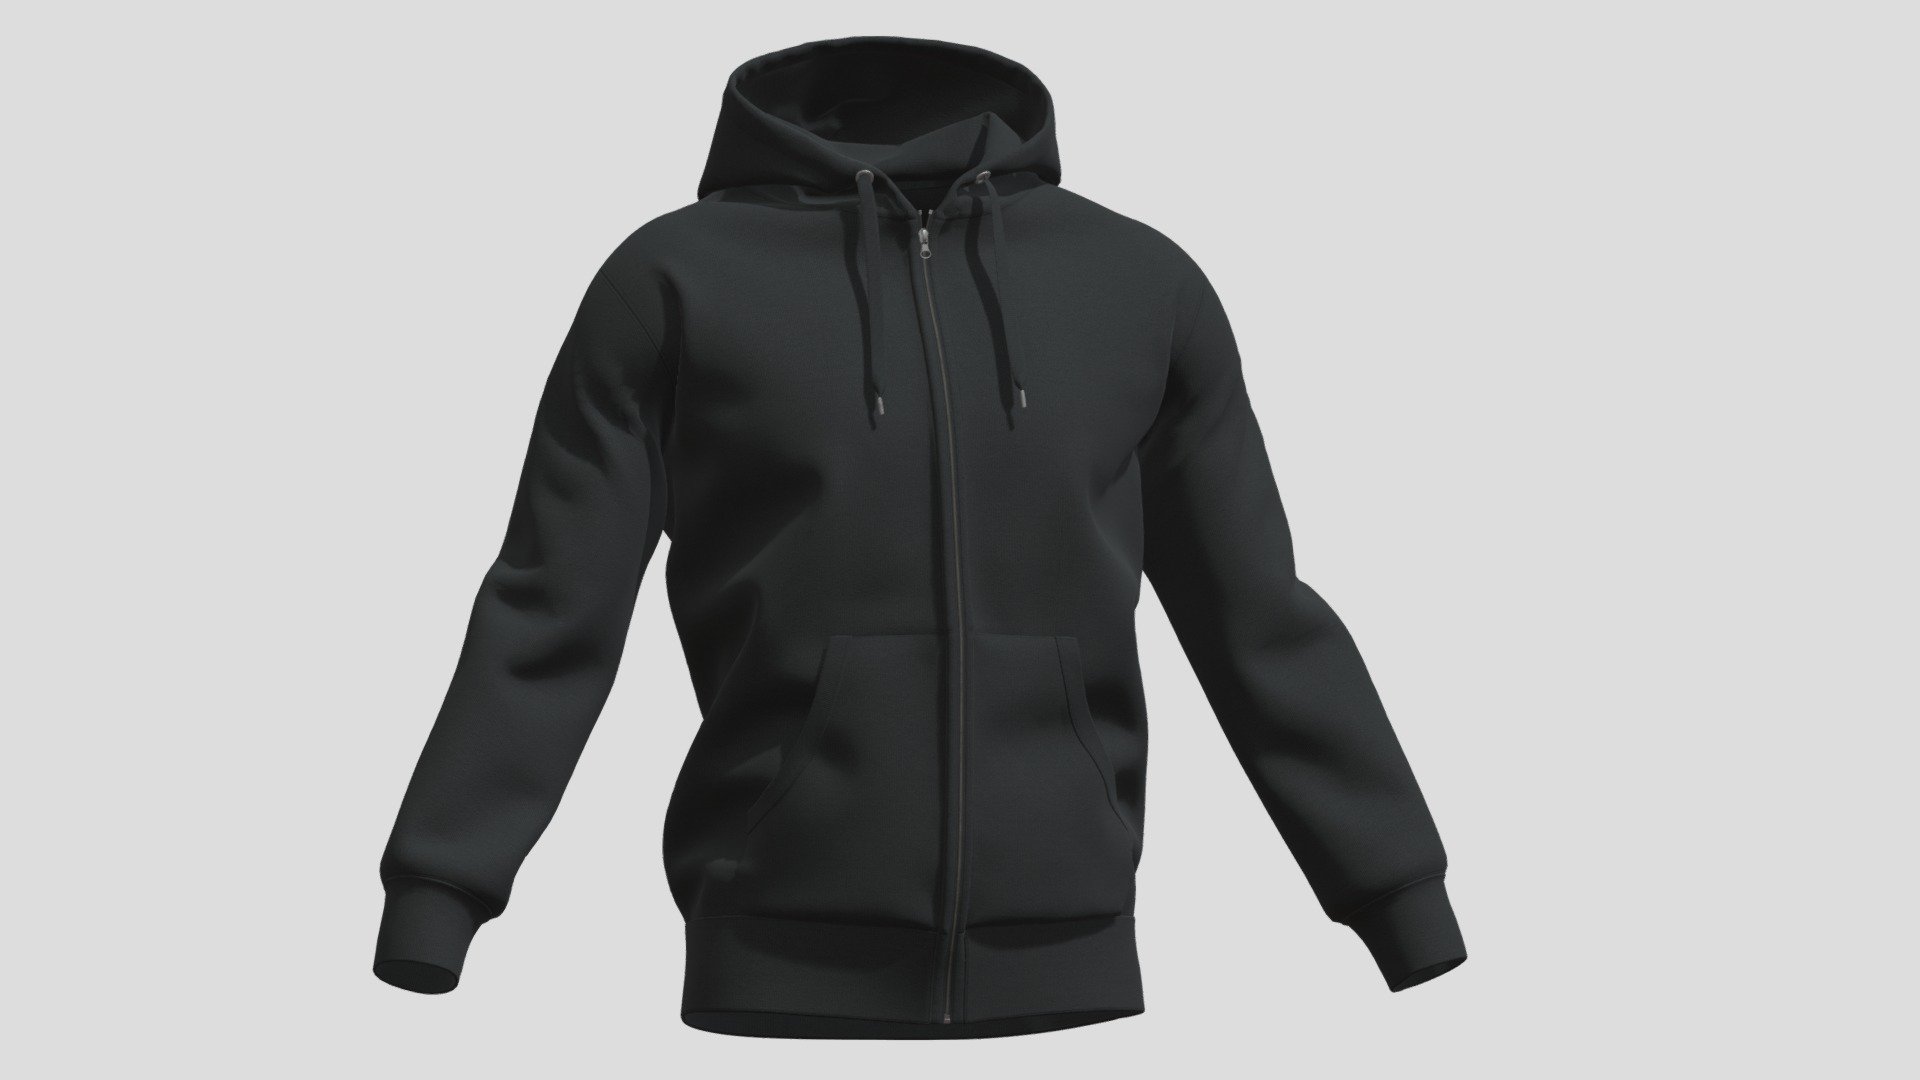 Hi, I'm Frezzy. I am leader of Cgivn studio. We are a team of talented artists working together since 2013.
If you want hire me to do 3d model please touch me at:cgivn.studio Thanks you! - Hoodie Zip Black PBR Realistic - Buy Royalty Free 3D model by Frezzy (@frezzy3d) 3d model